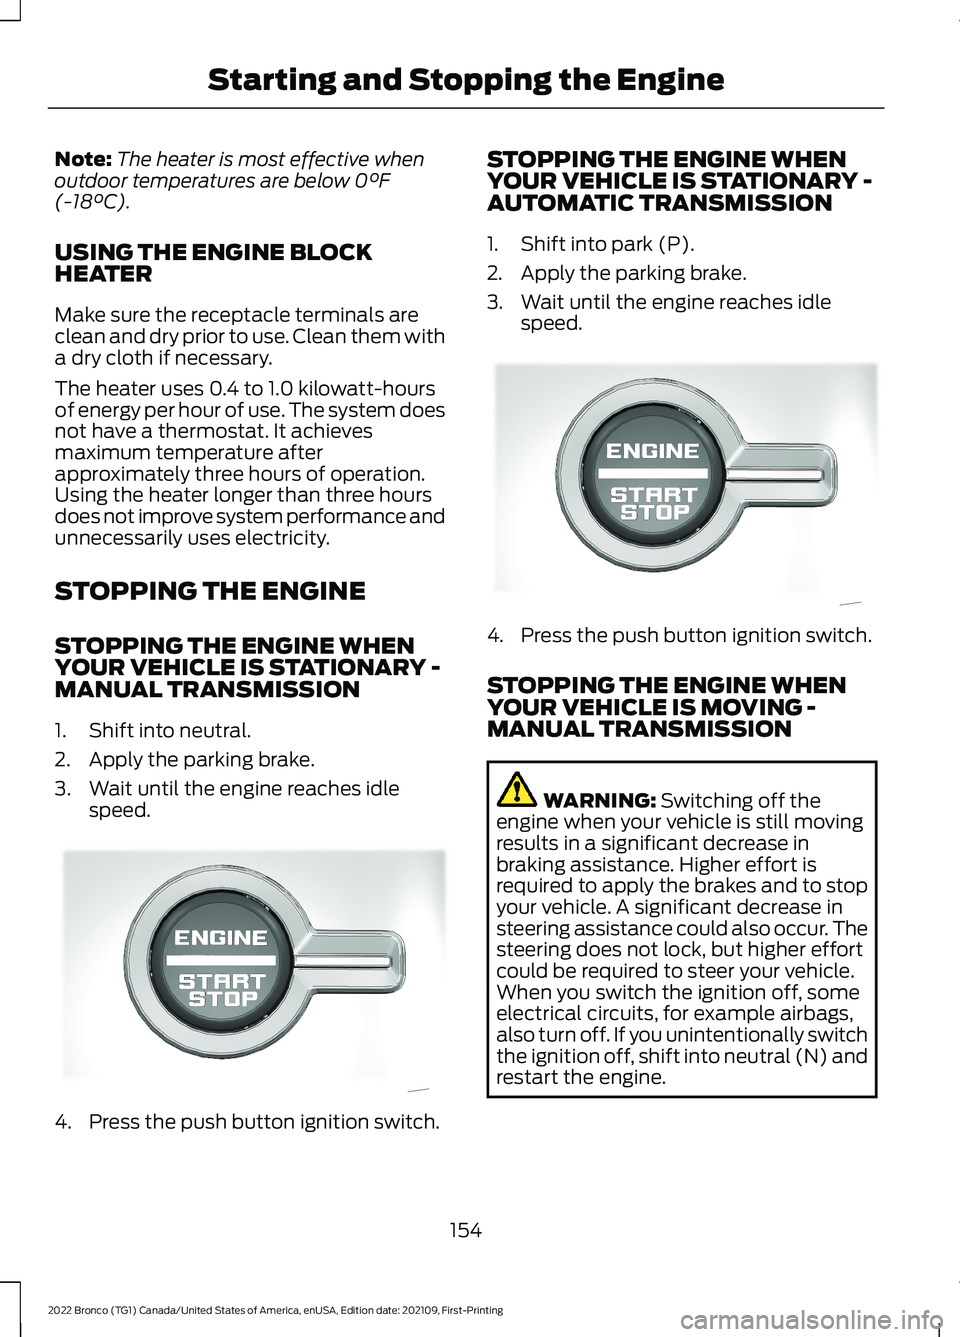 FORD BRONCO 2022  Owners Manual Note:The heater is most effective whenoutdoor temperatures are below 0°F(-18°C).
USING THE ENGINE BLOCKHEATER
Make sure the receptacle terminals areclean and dry prior to use. Clean them witha dry c